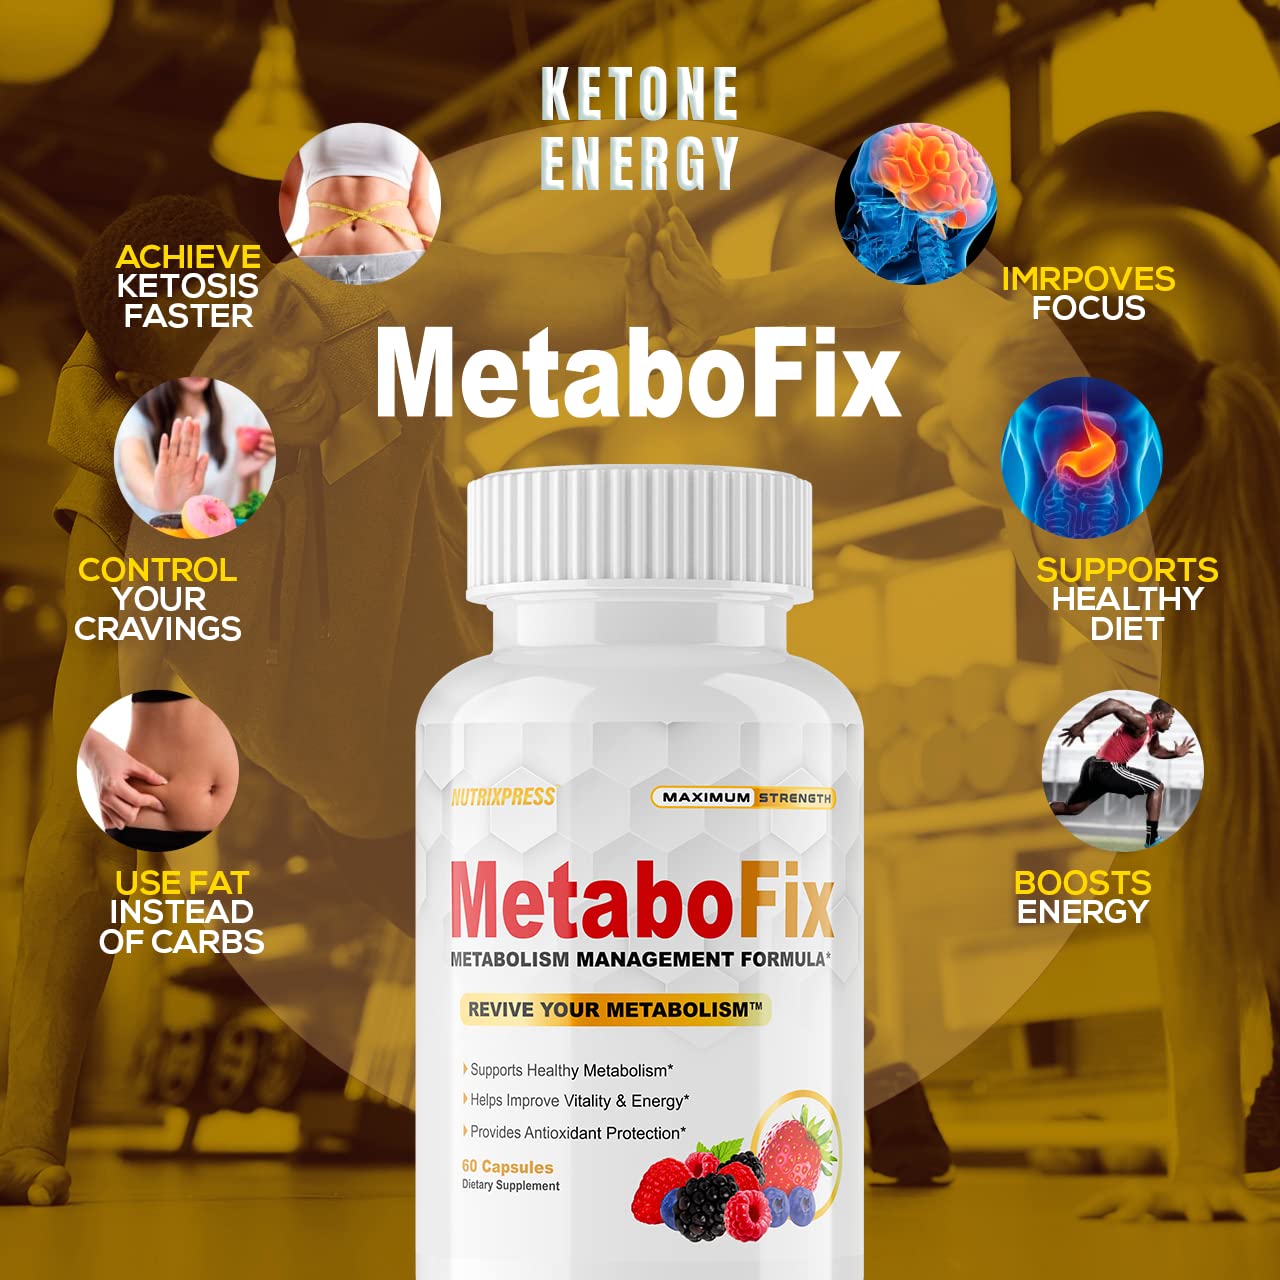 is metabofix a good product